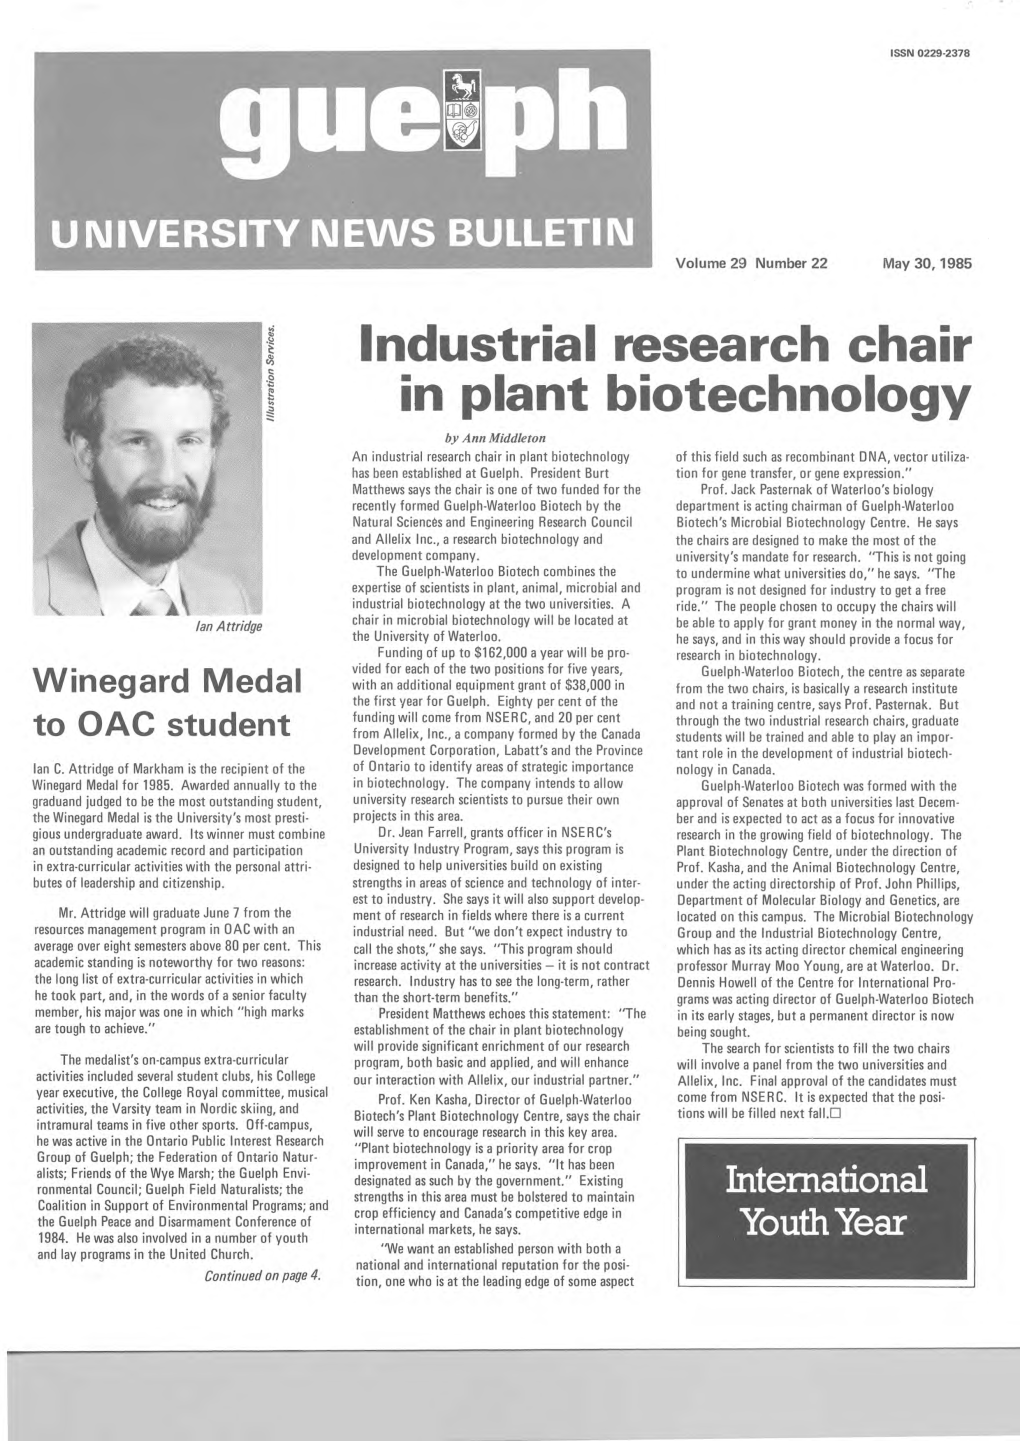 Industrial Research Chair in Plant Biotechnology